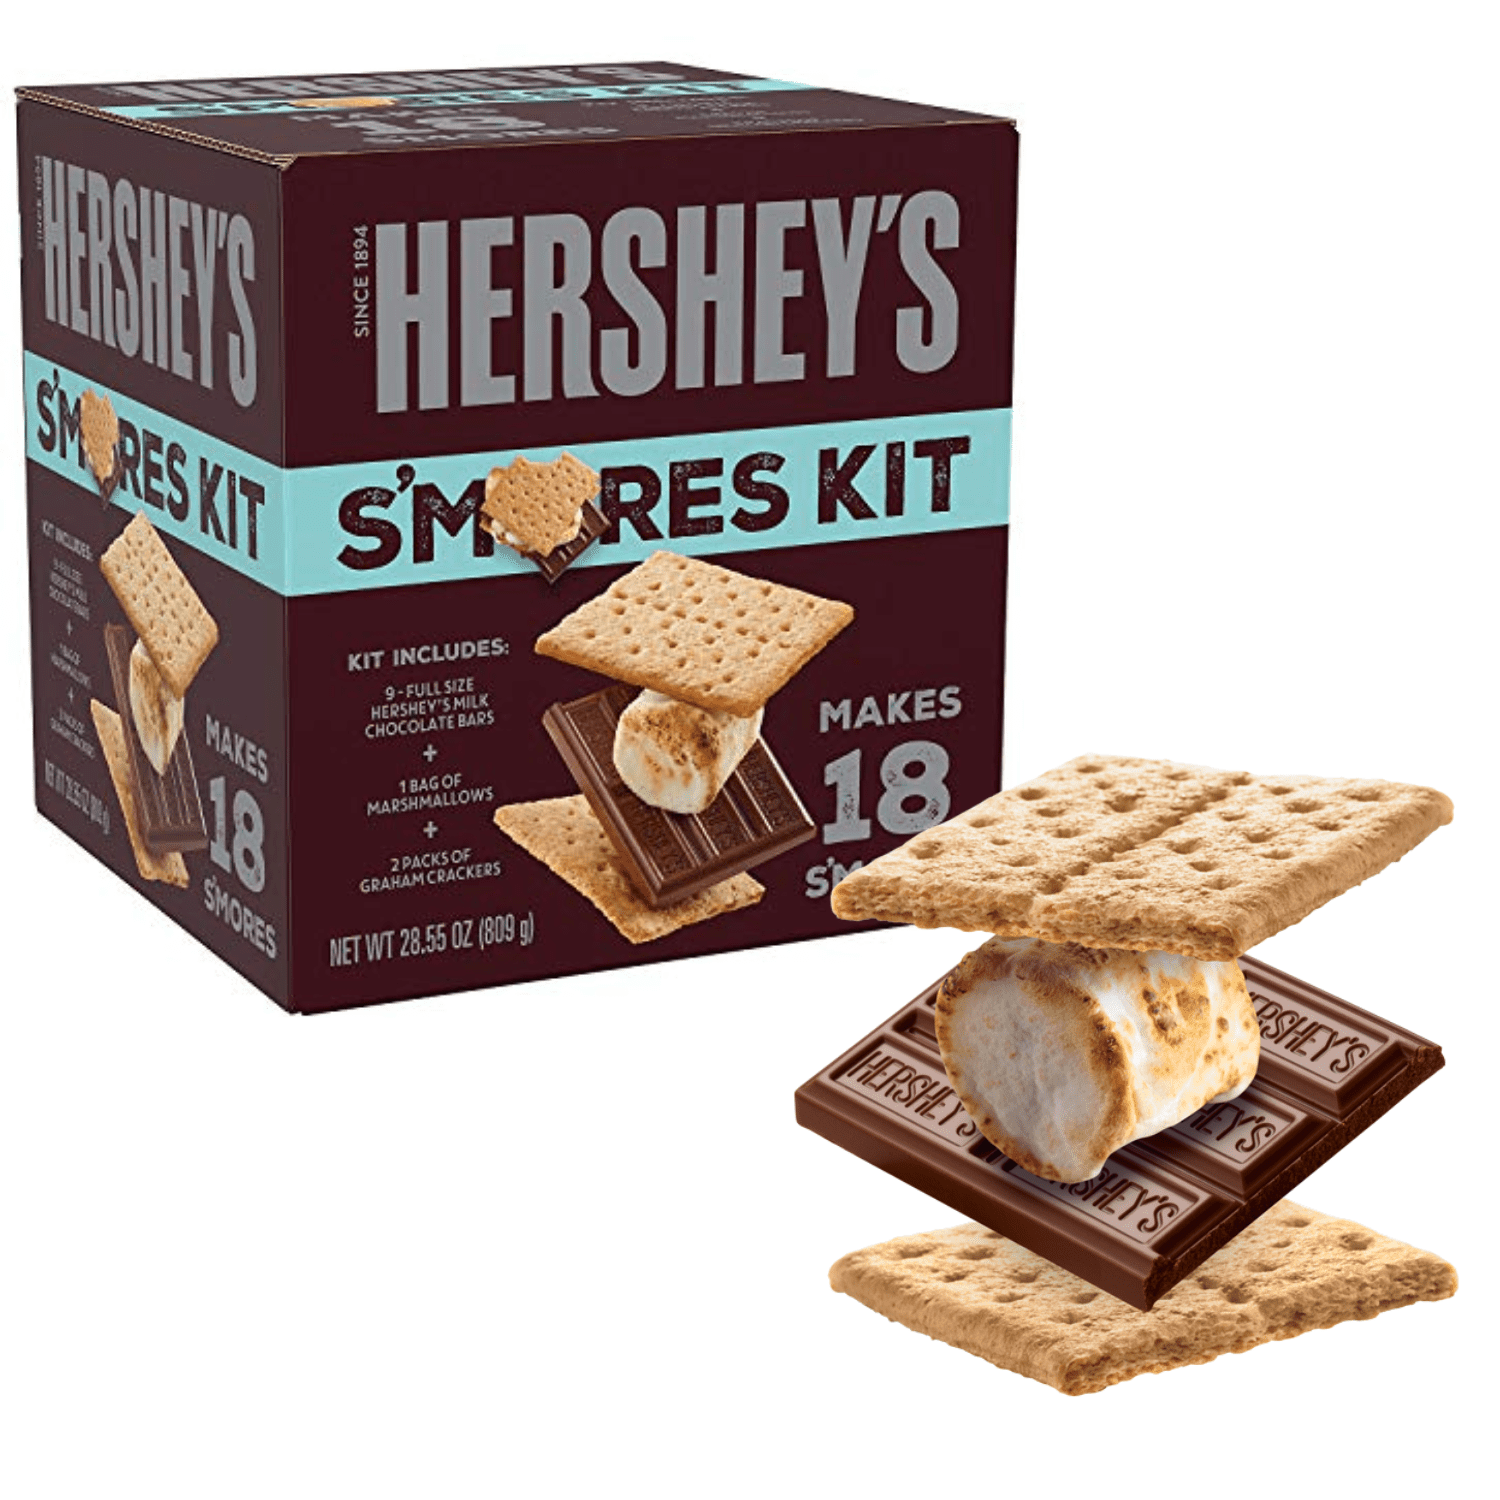 Hershey's S'mores Kit 18 Smores 28.55 Oz Box | Include 9 Full-Size Hershey  Bars, 2 Pack Graham Cracker, 1 Bag of Campfire Marshmallow for Camping  Outdoor Fire Pits, Birthday & Parties (Packaging Vary) - Walmart.com